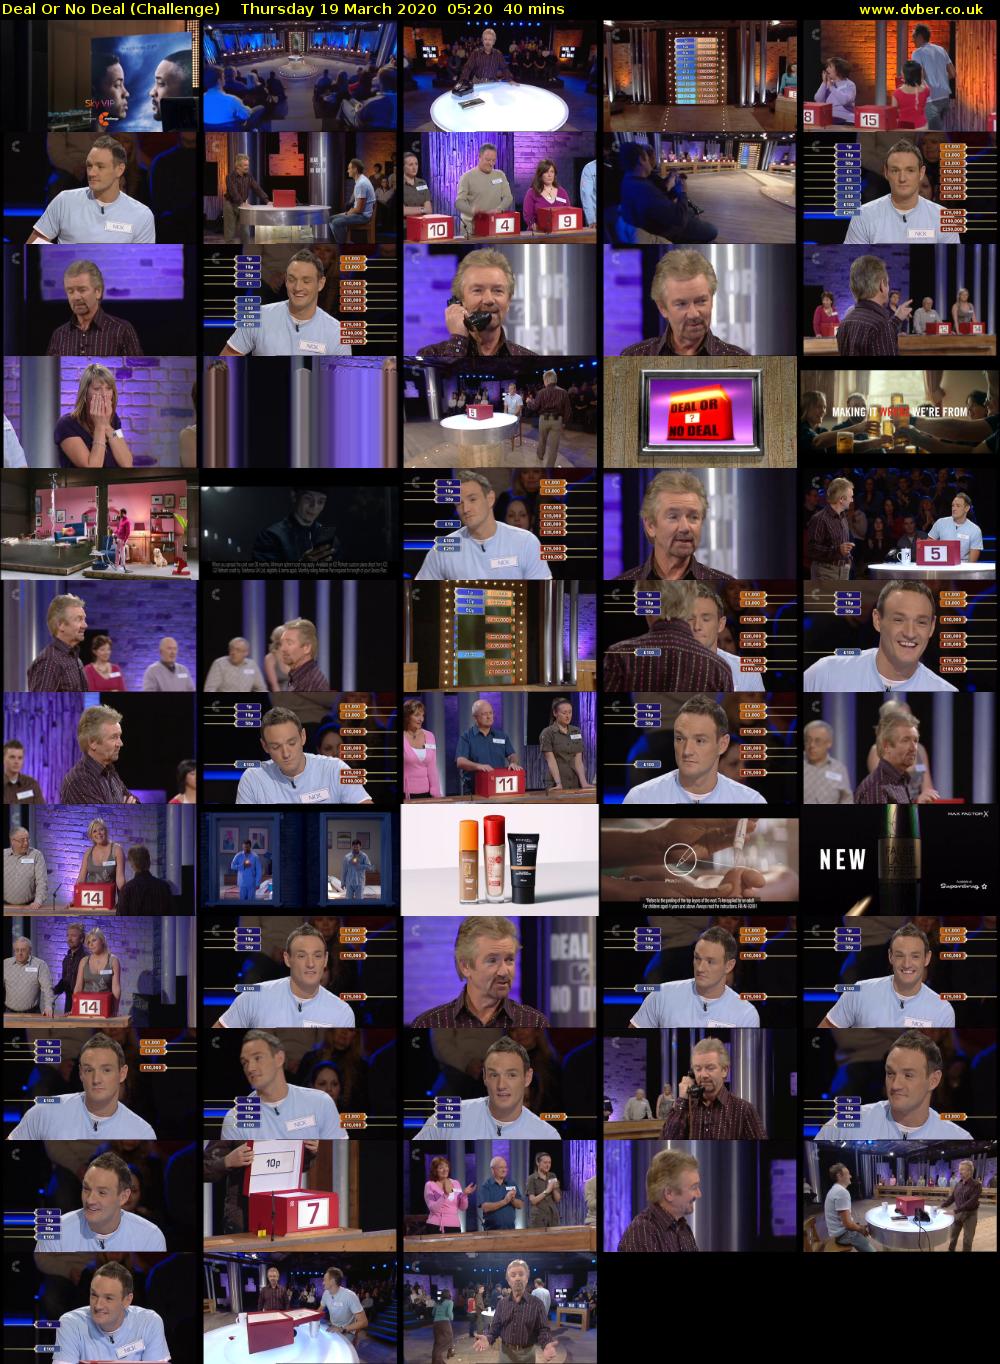 Deal Or No Deal (Challenge) Thursday 19 March 2020 05:20 - 06:00